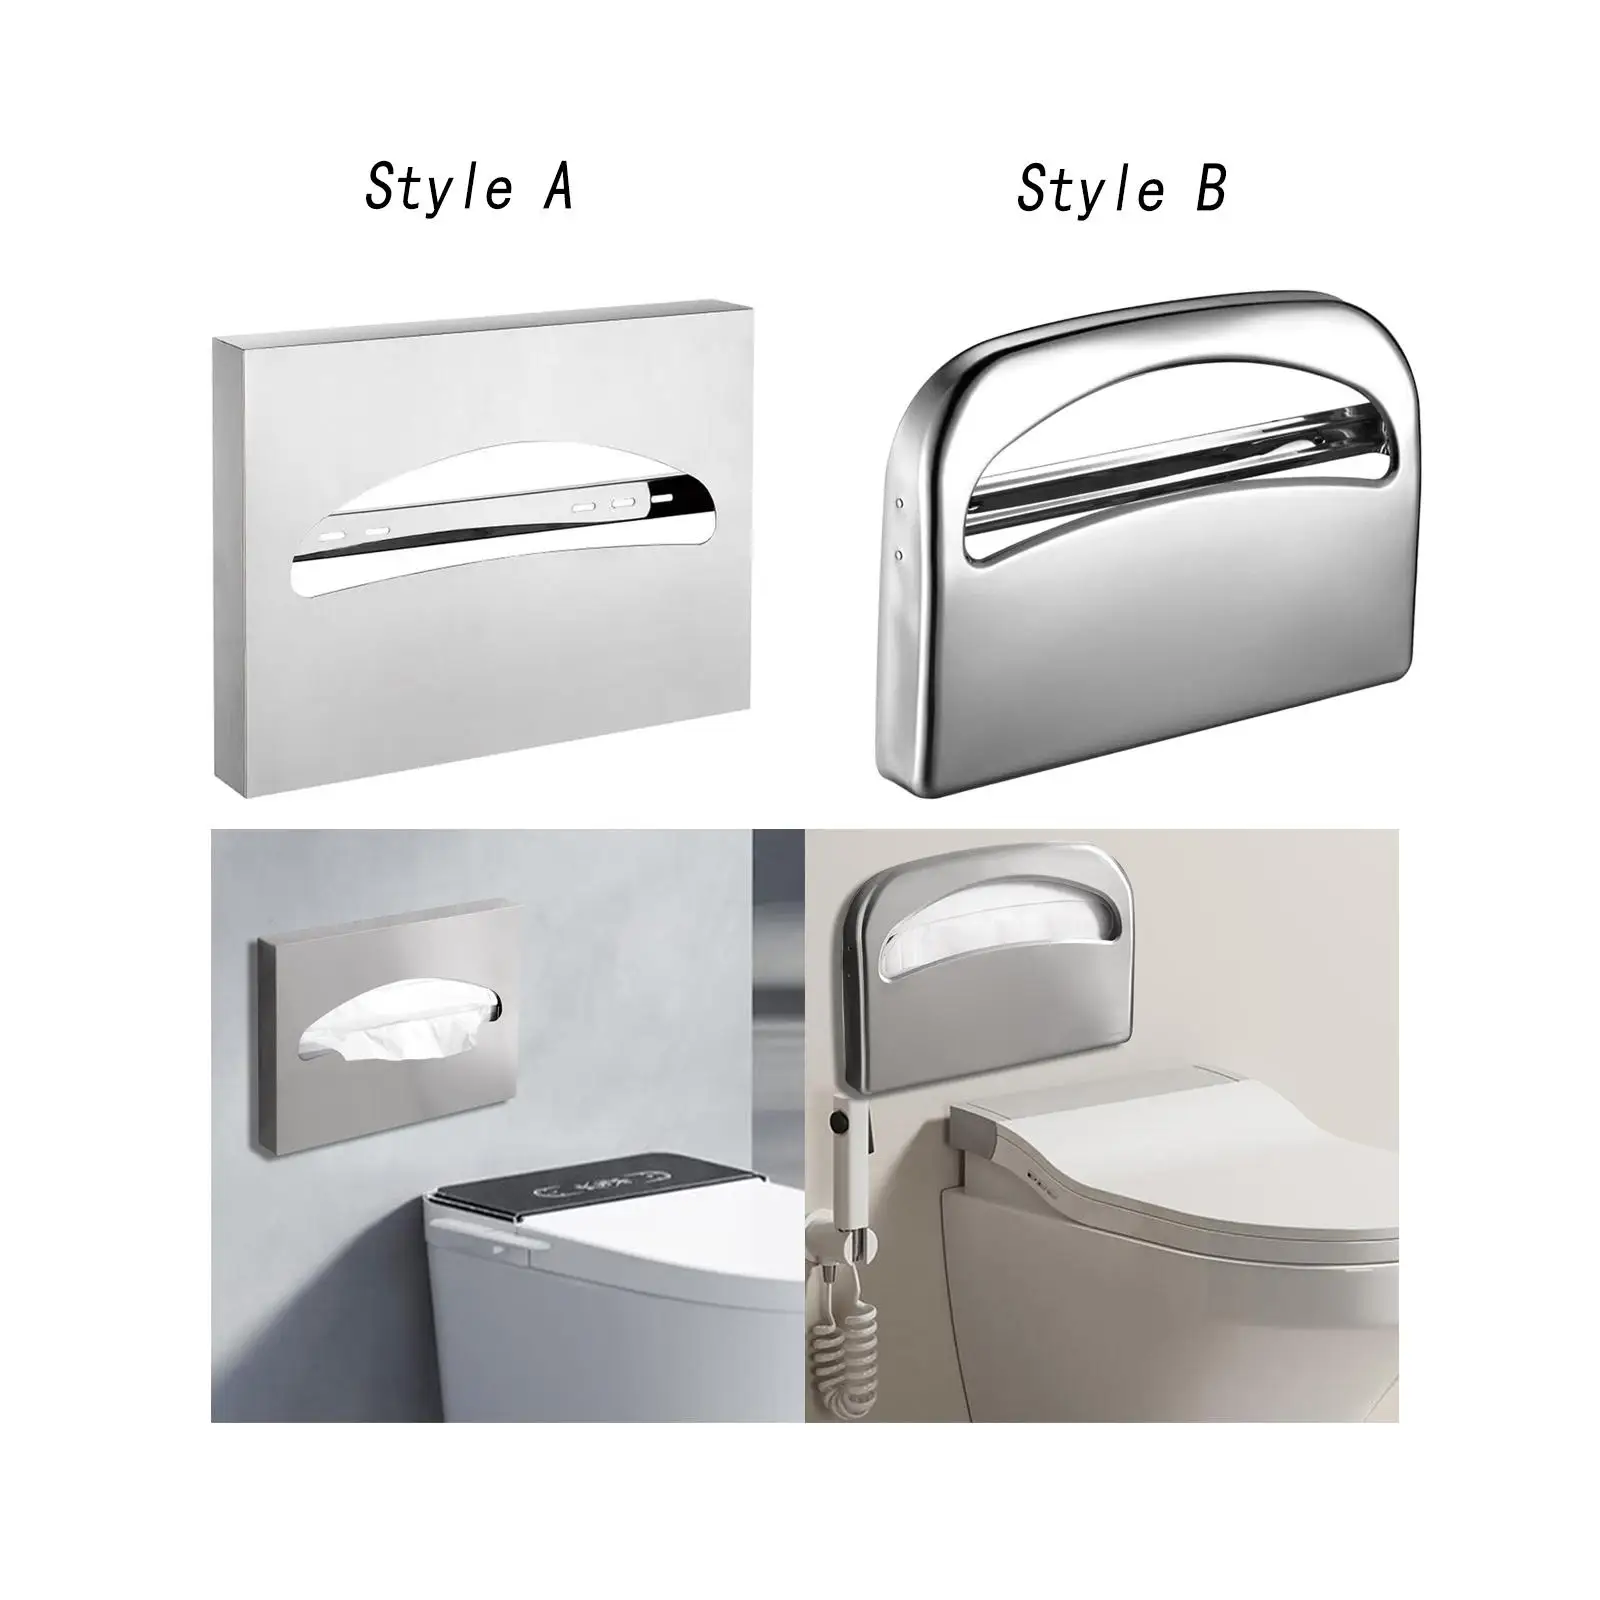 Toilet Seat Covers Dispenser with Screws Heavy Duty Toilet Seat Cover Holder for Office Restaurants Commercial Public Bathroom